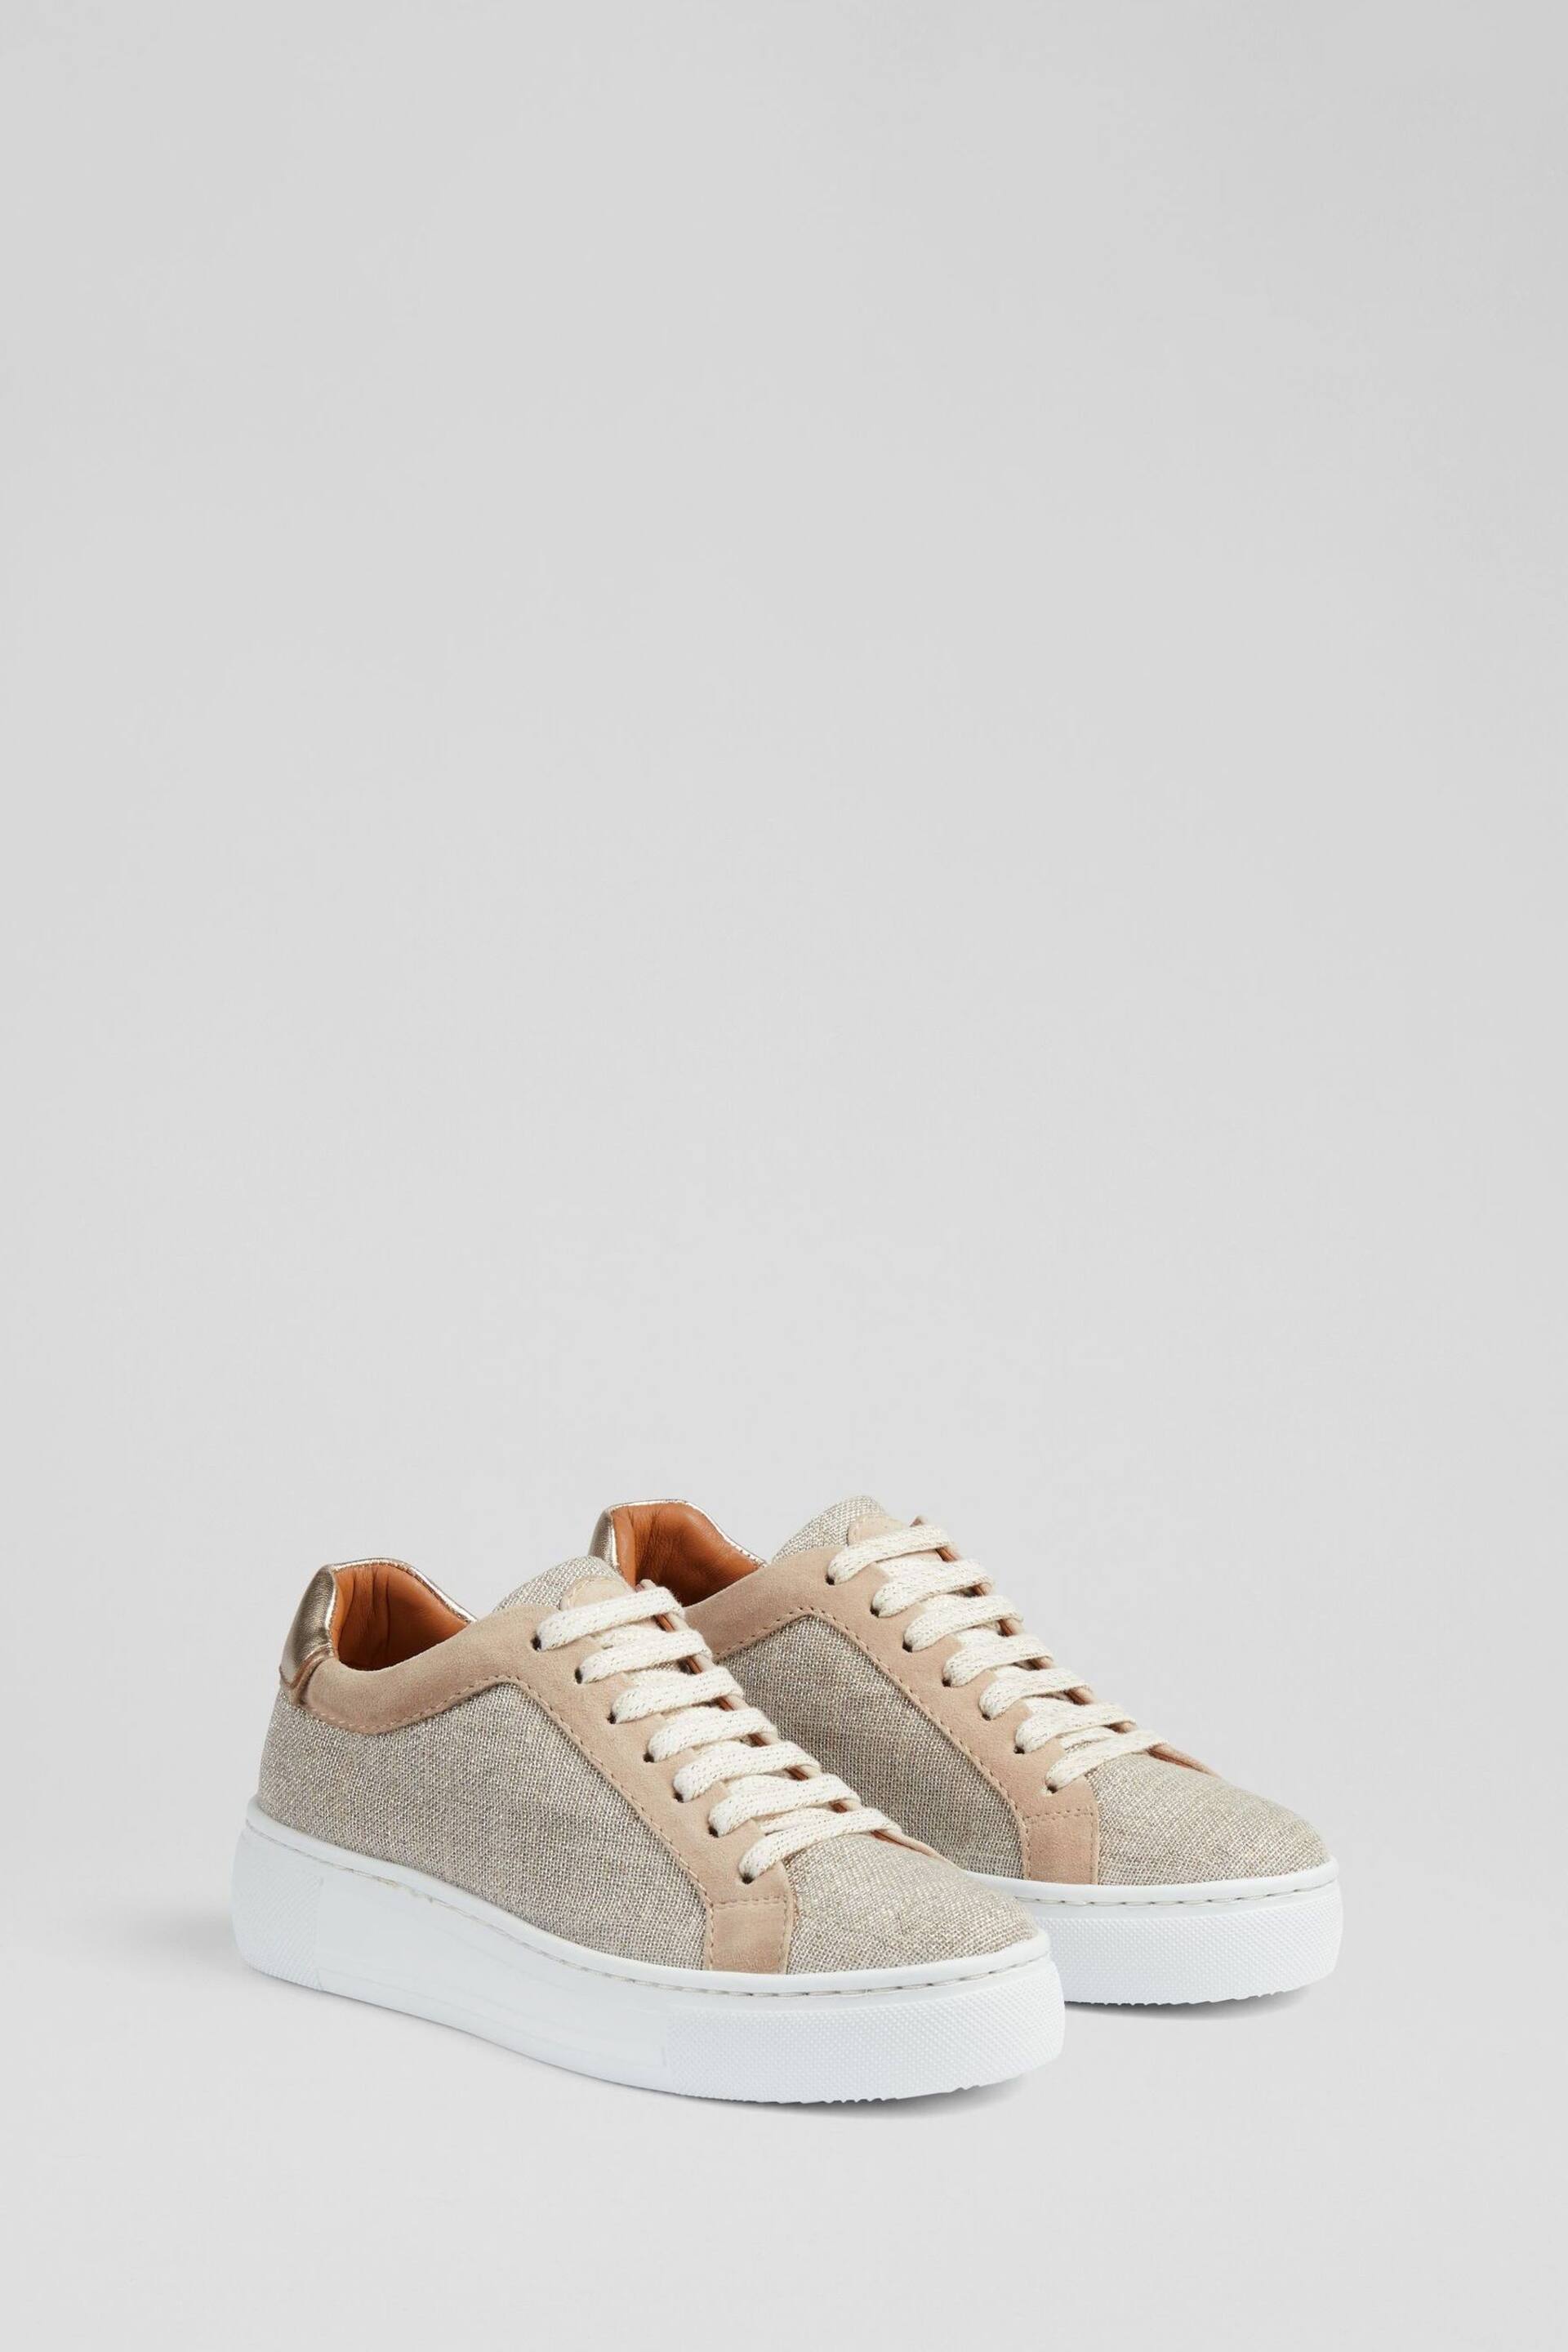 LK Bennett Fabric And Beige Suede Flatform Trainers - Image 2 of 4